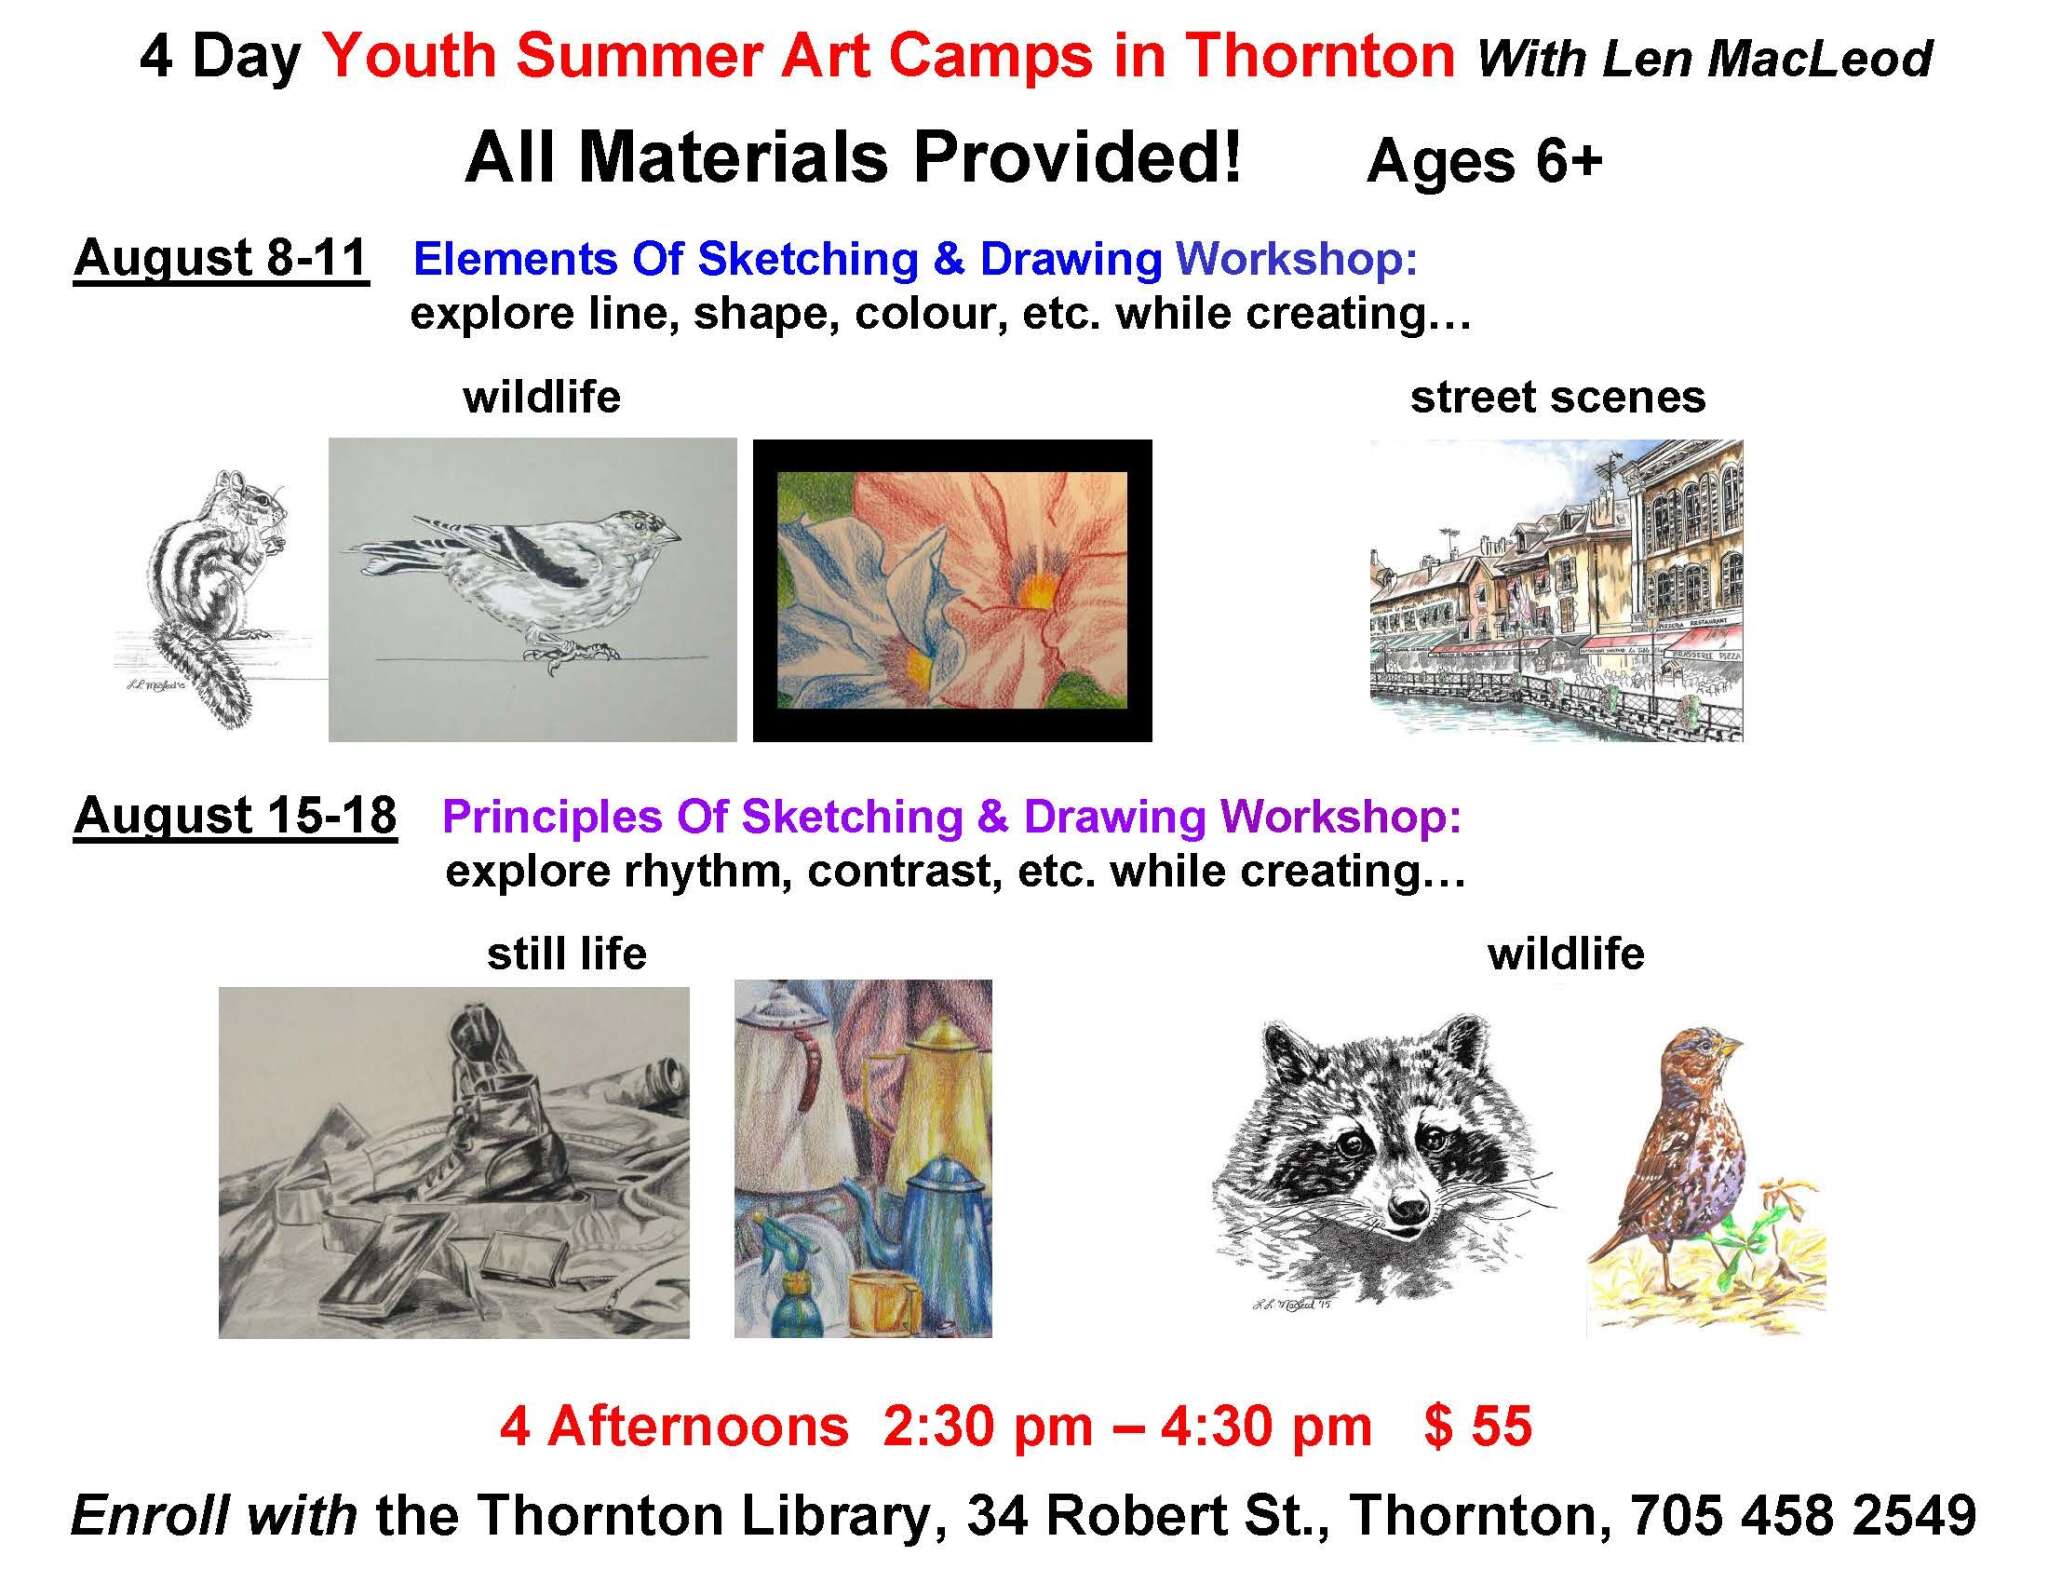 Summer Art Camps with Len MacLeod - 4 Day Youth Summer Art Camps in Thornton With Len MacLeod